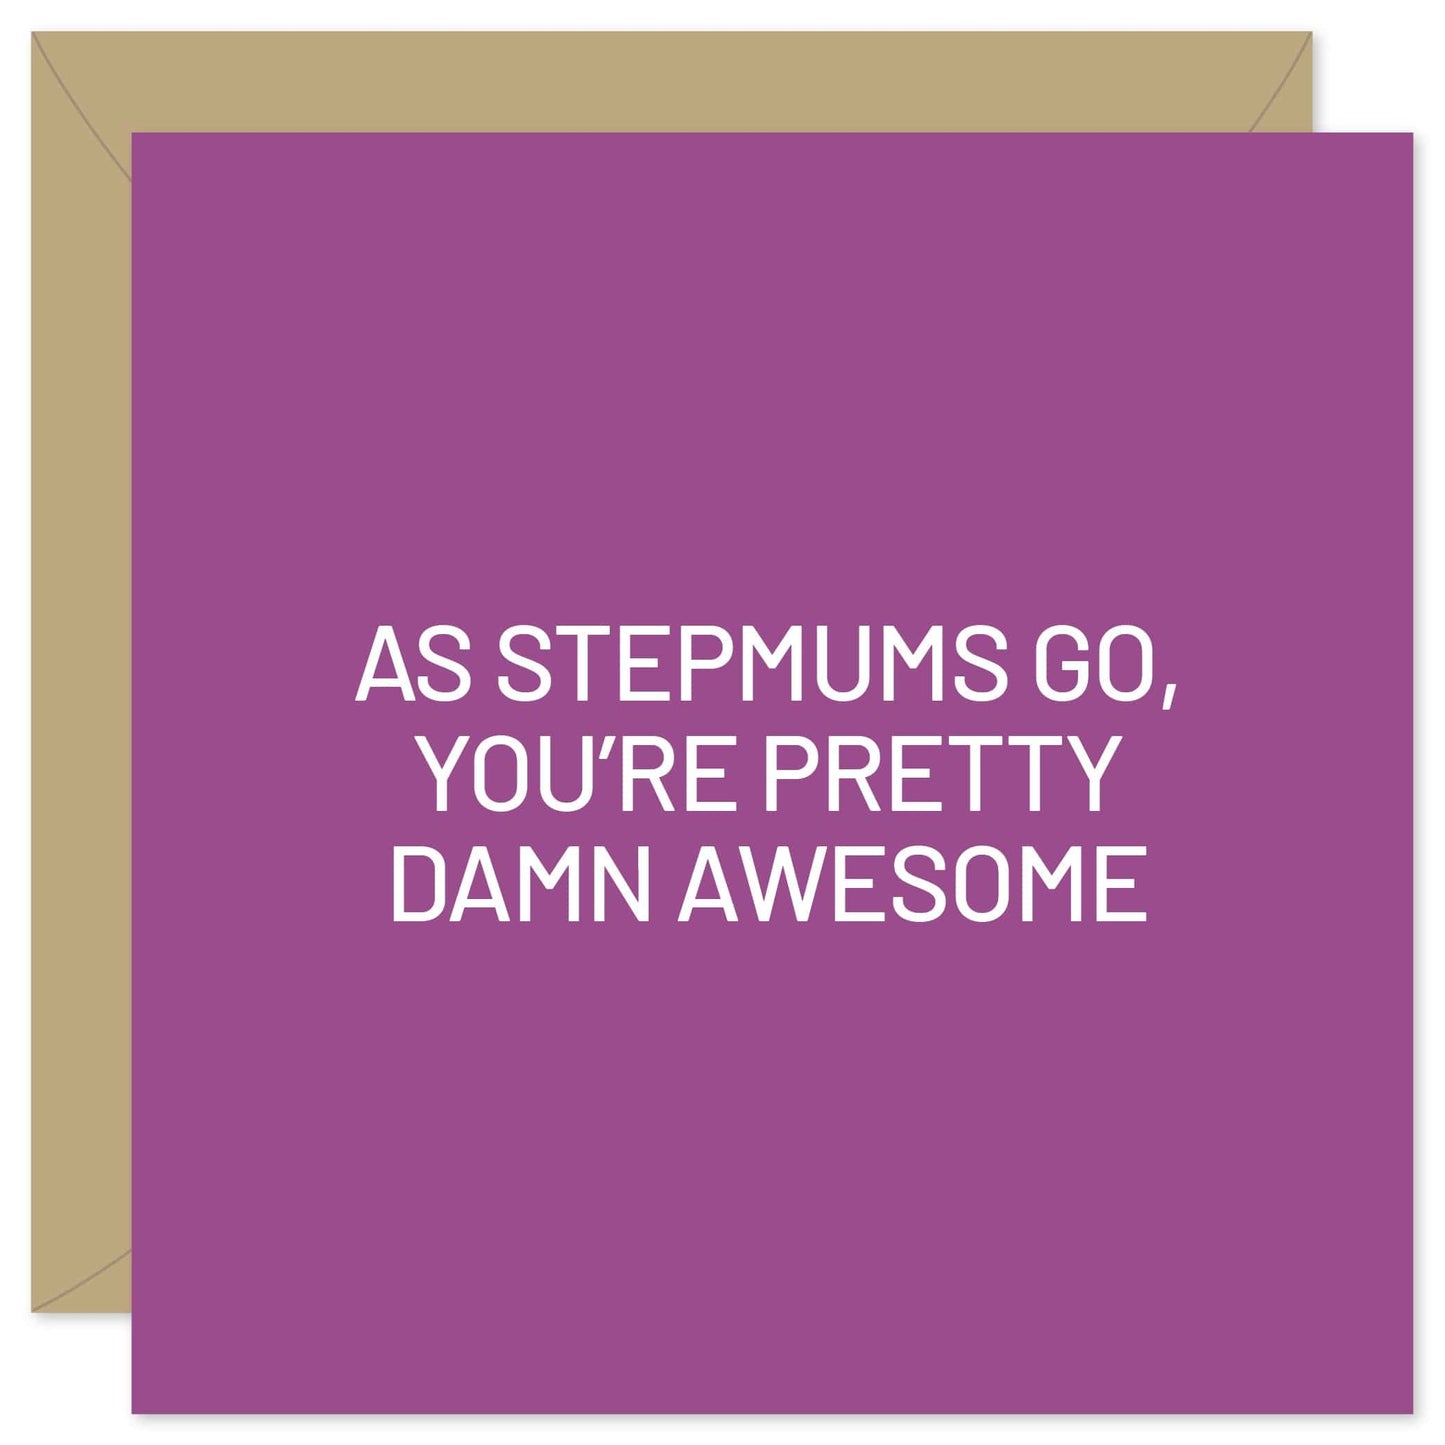 As stepmums go card from Purple Tree Designs